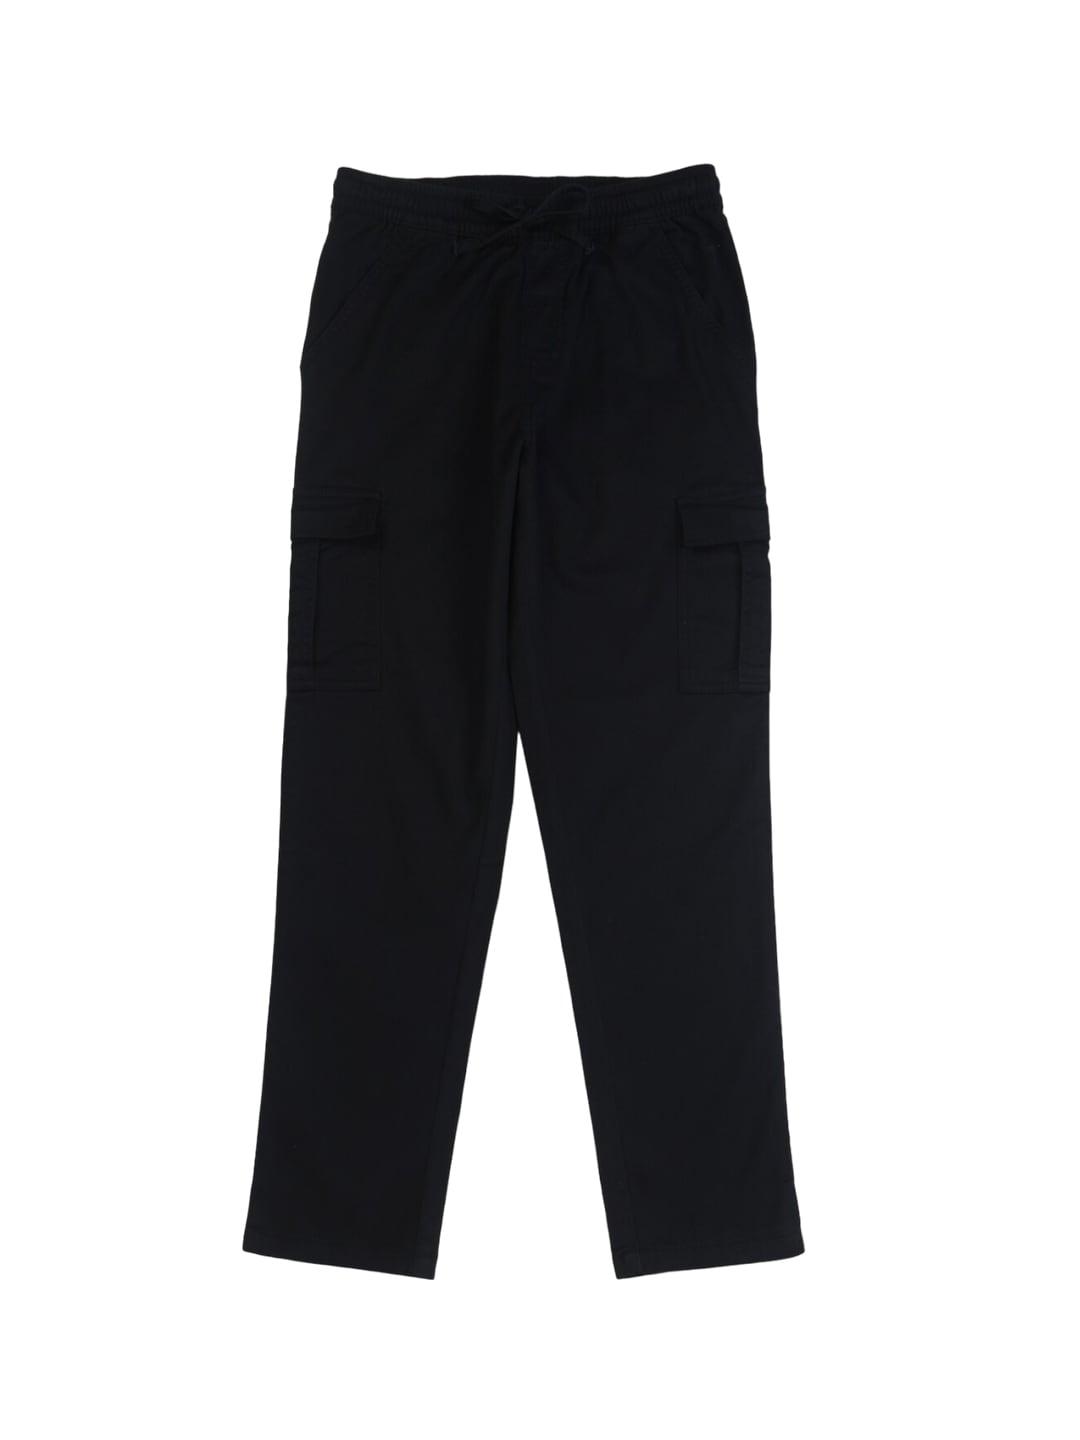 palm-tree-boys-mid-rise-cotton-cargos-trousers